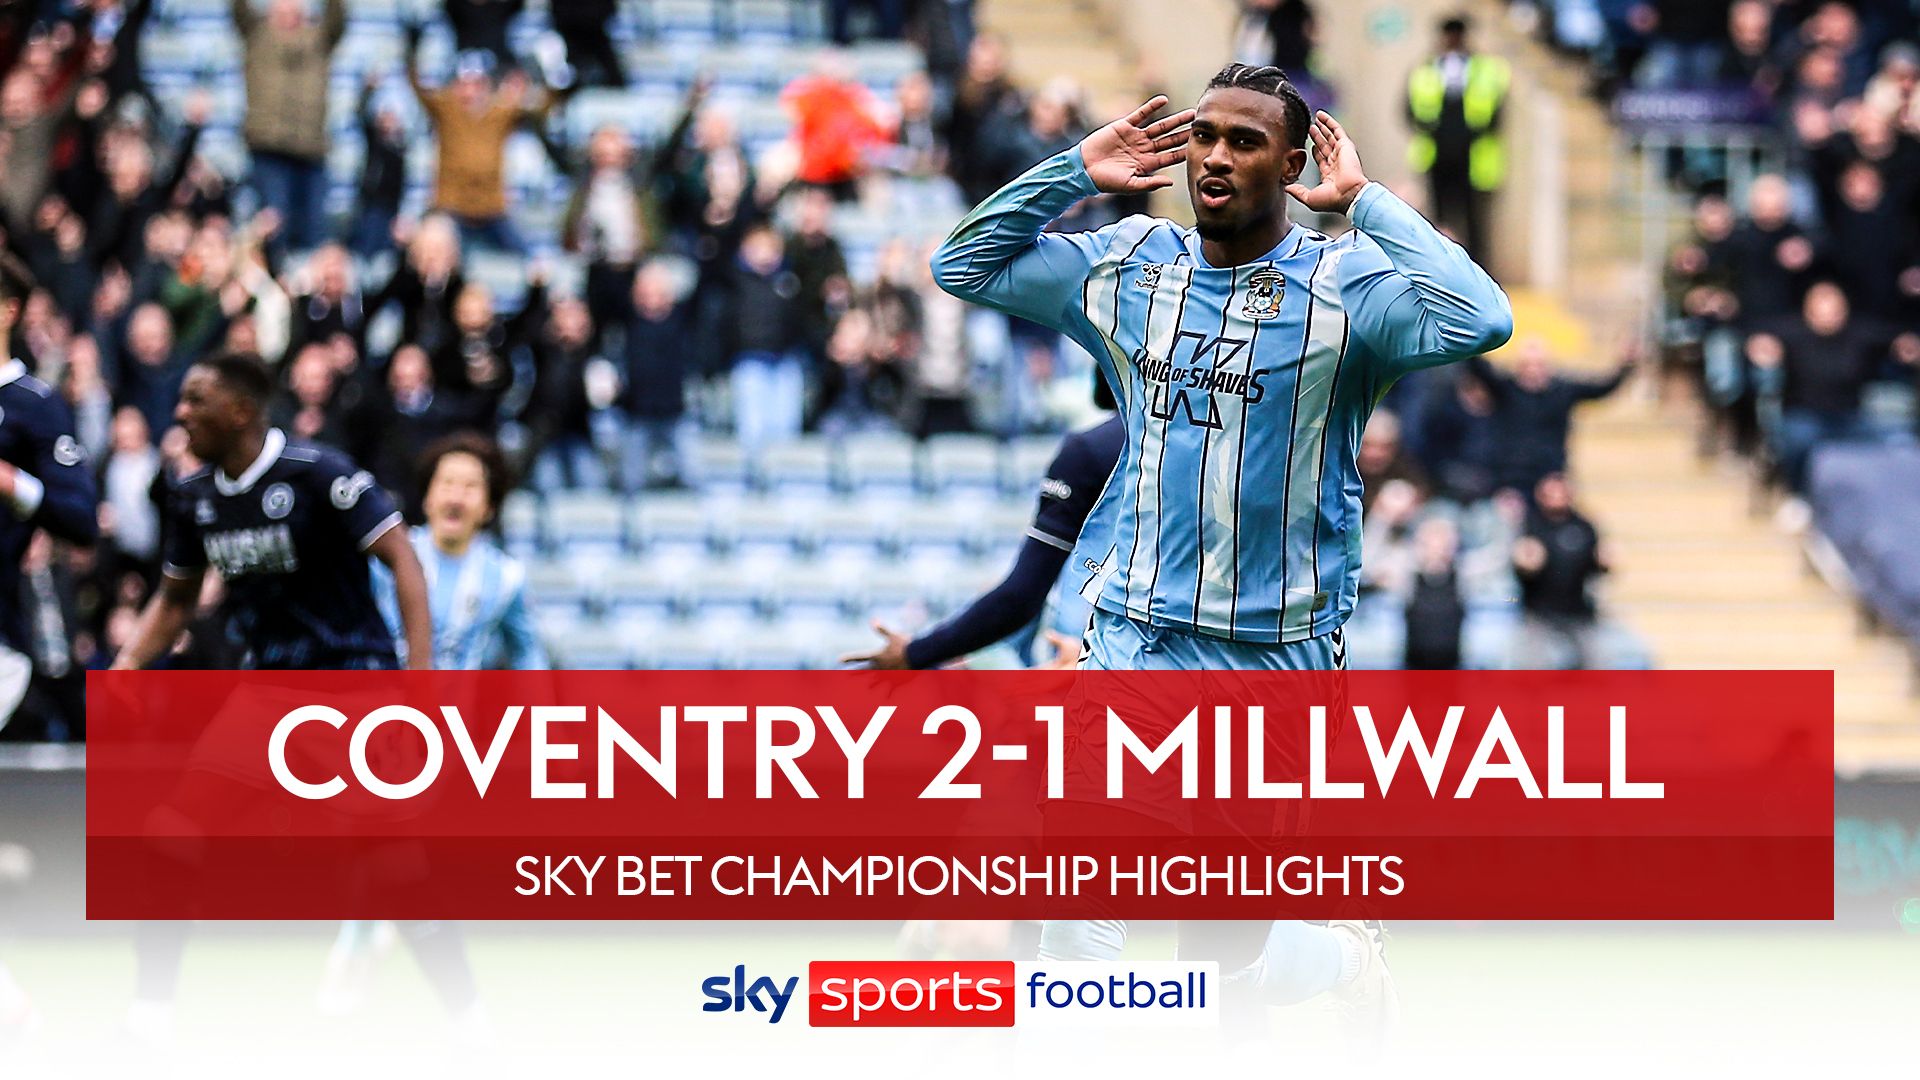 Coventry City 2-1 Millwall